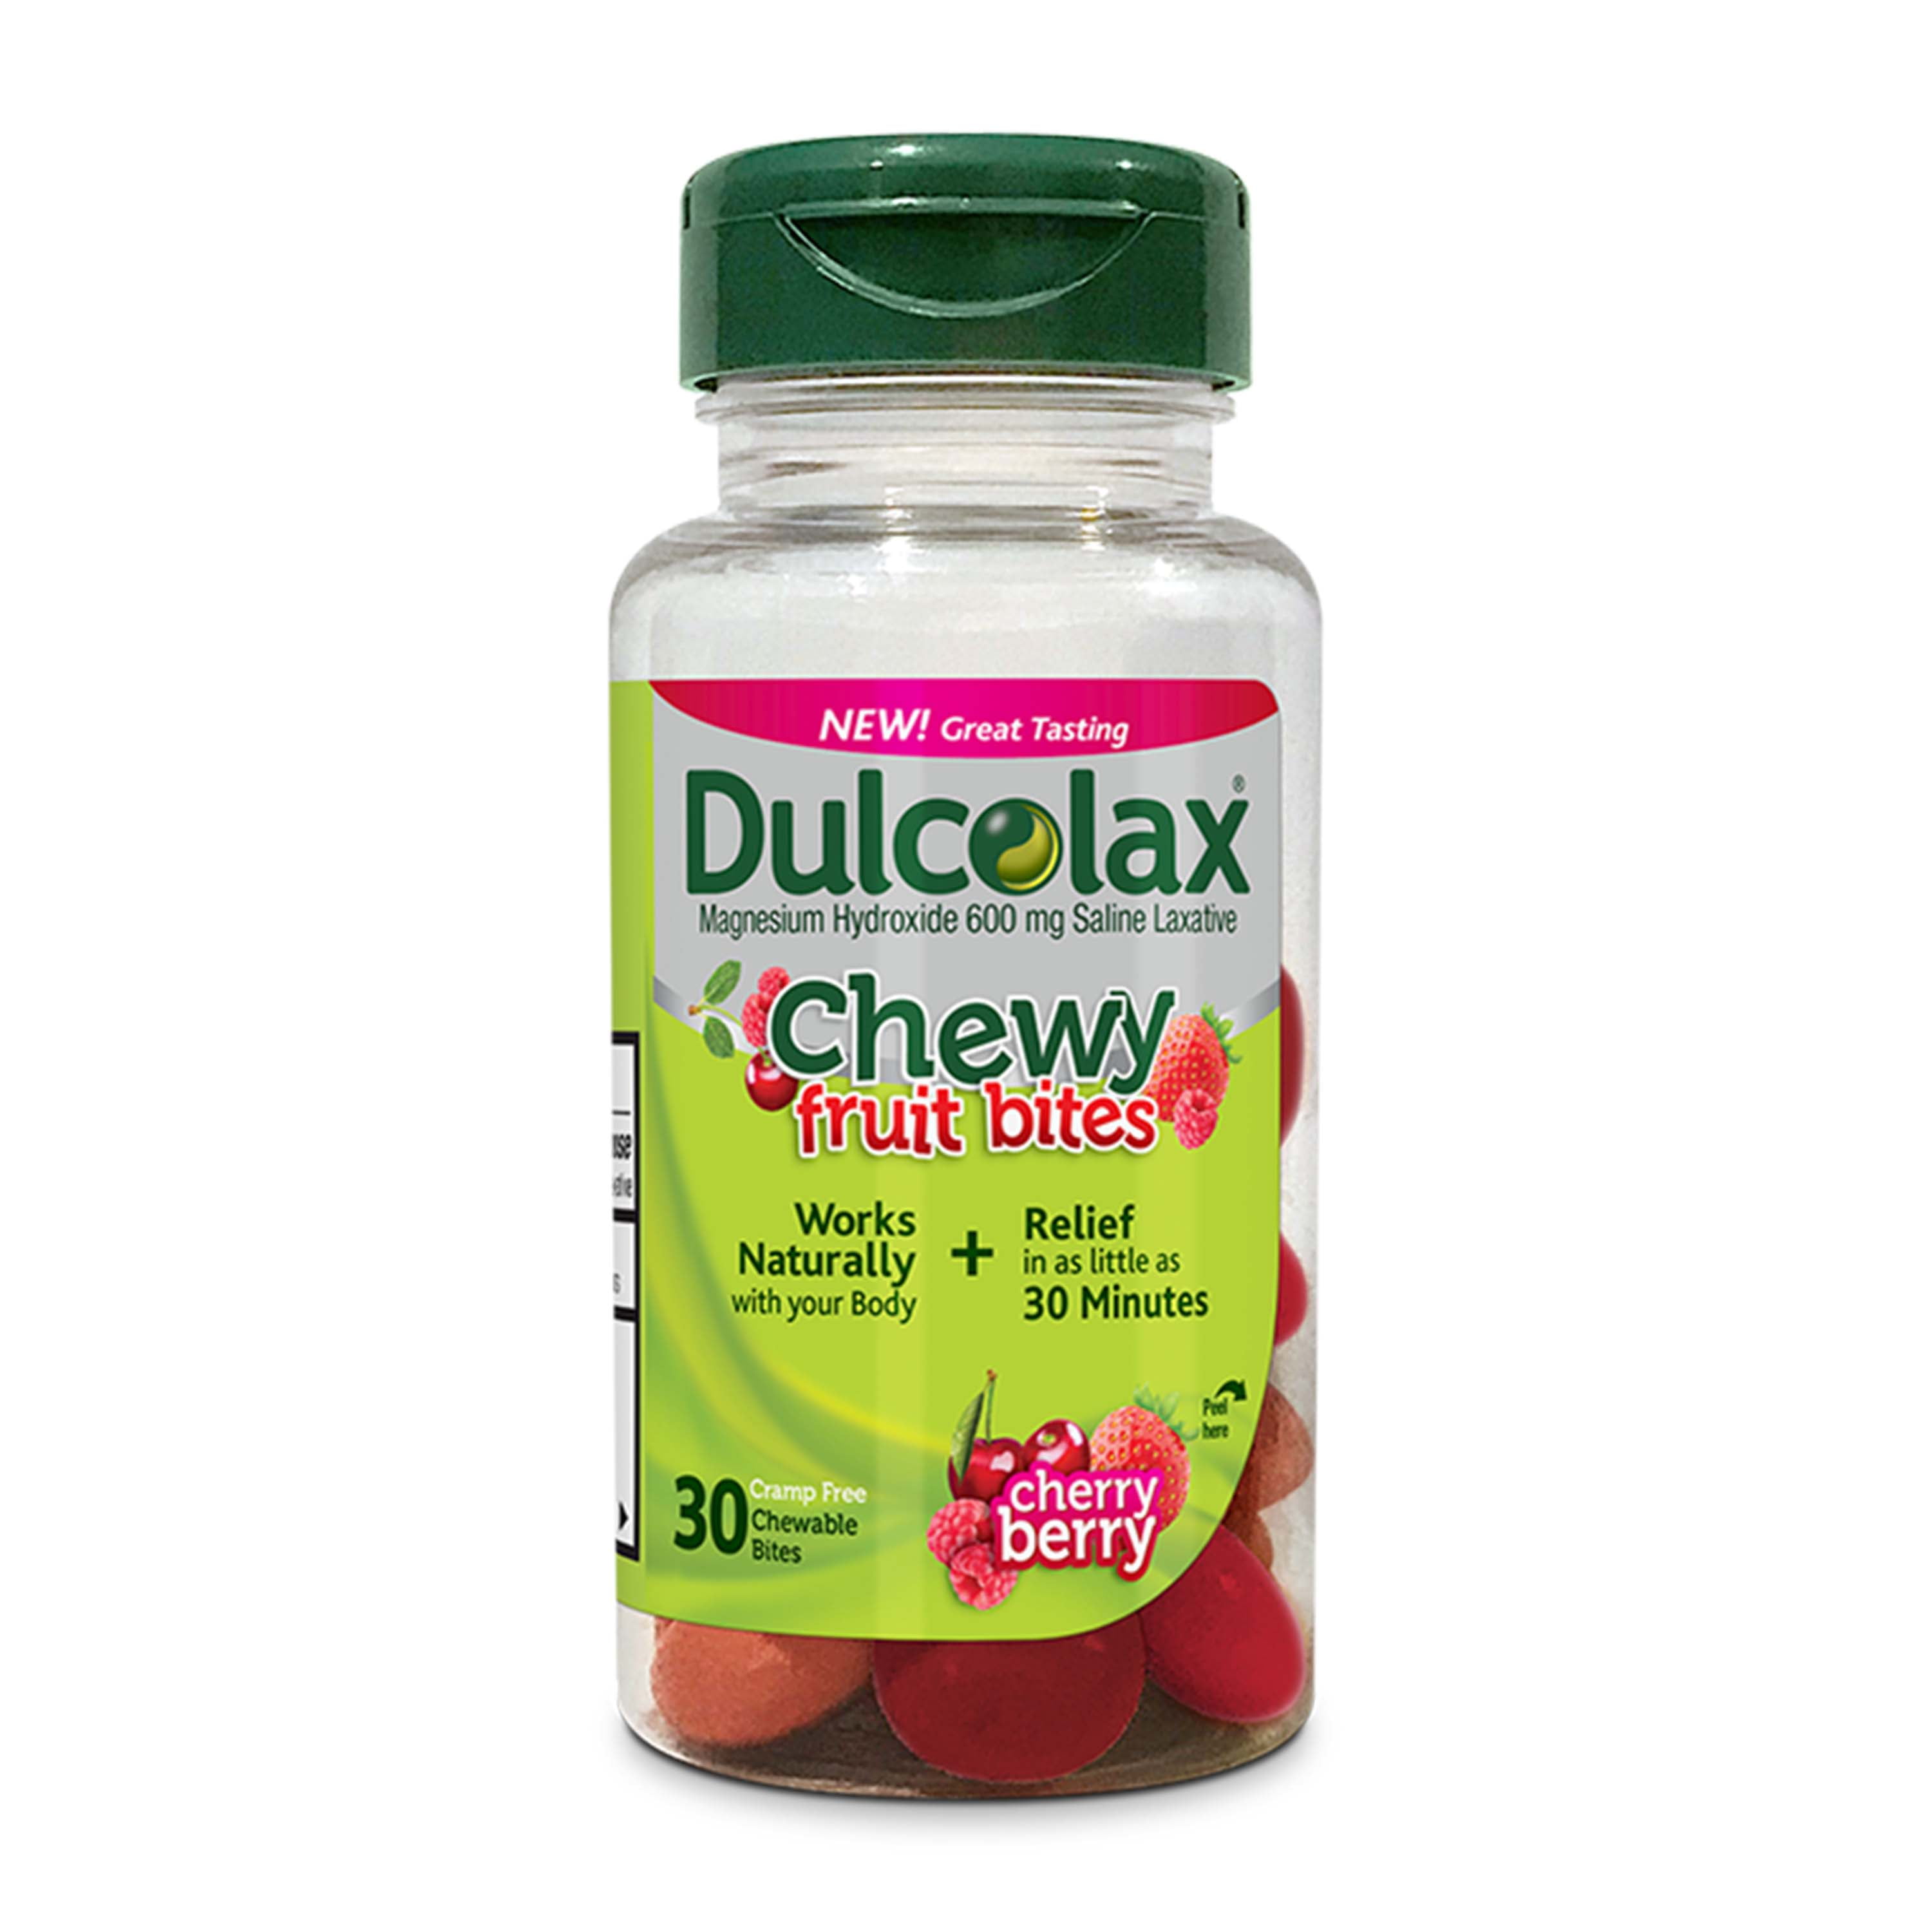 Dulcolax Chewy Fruit Bites, Saline Laxative, Cherry Berry Chewables, 30 Ct